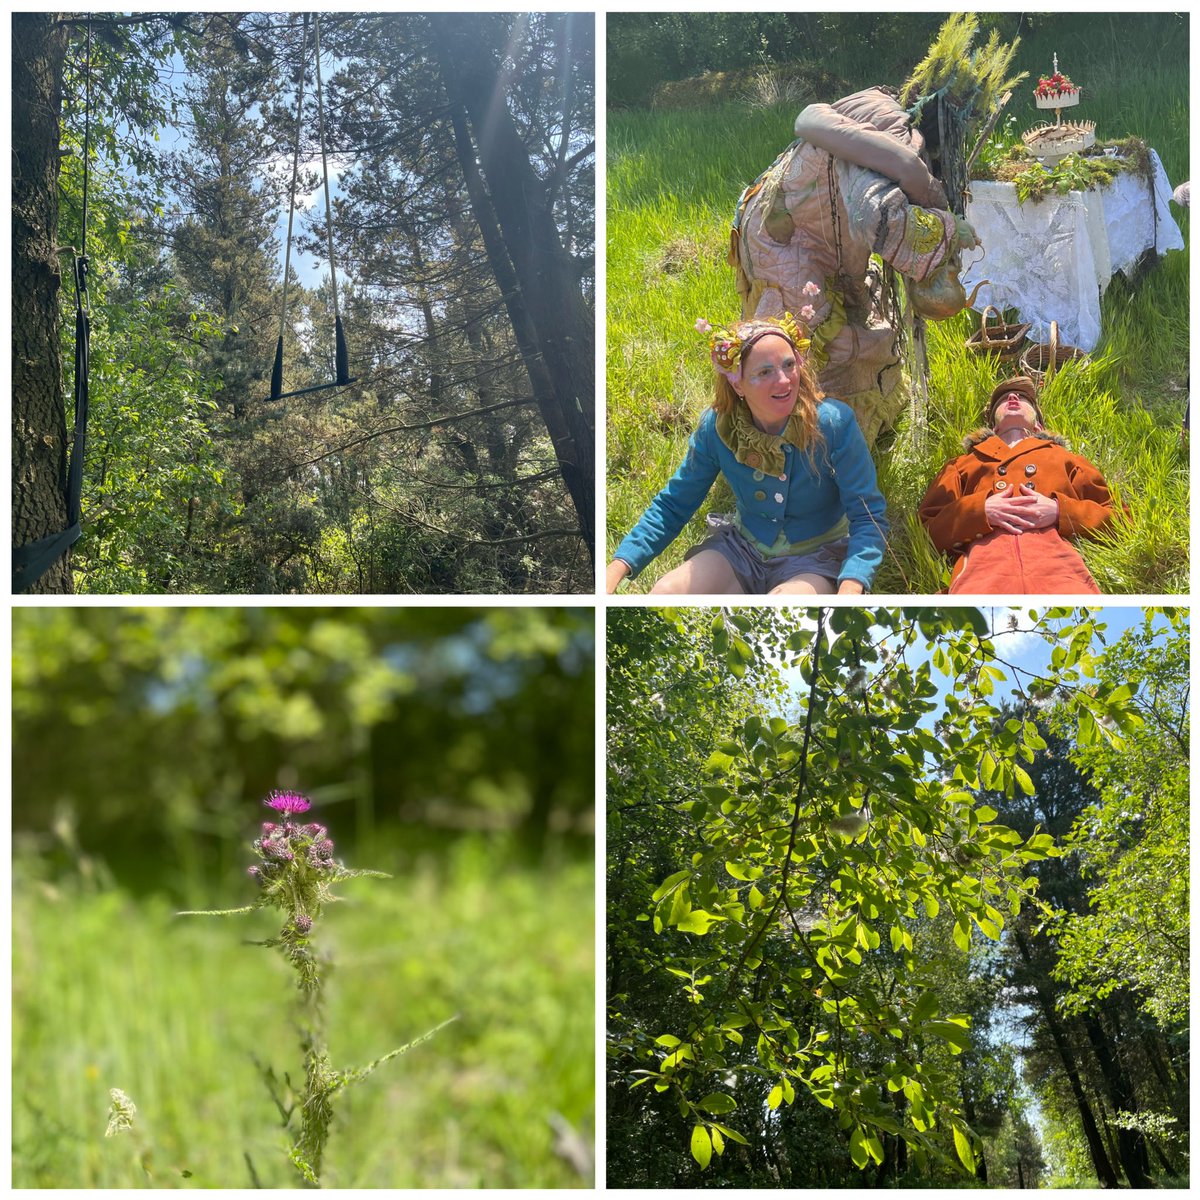 Did you know that #GreatBigGreenWeek starts today? To celebrate,EPC Scotland joined @WoodlandTrust and @rowanbankenv for a magical journey through Foulshiels Woods,West Lothian. Find out what’s happening near you:greatbiggreenweek.com/find-an-event/  💚 🌳 #tlcommunityfund   @edencommunities